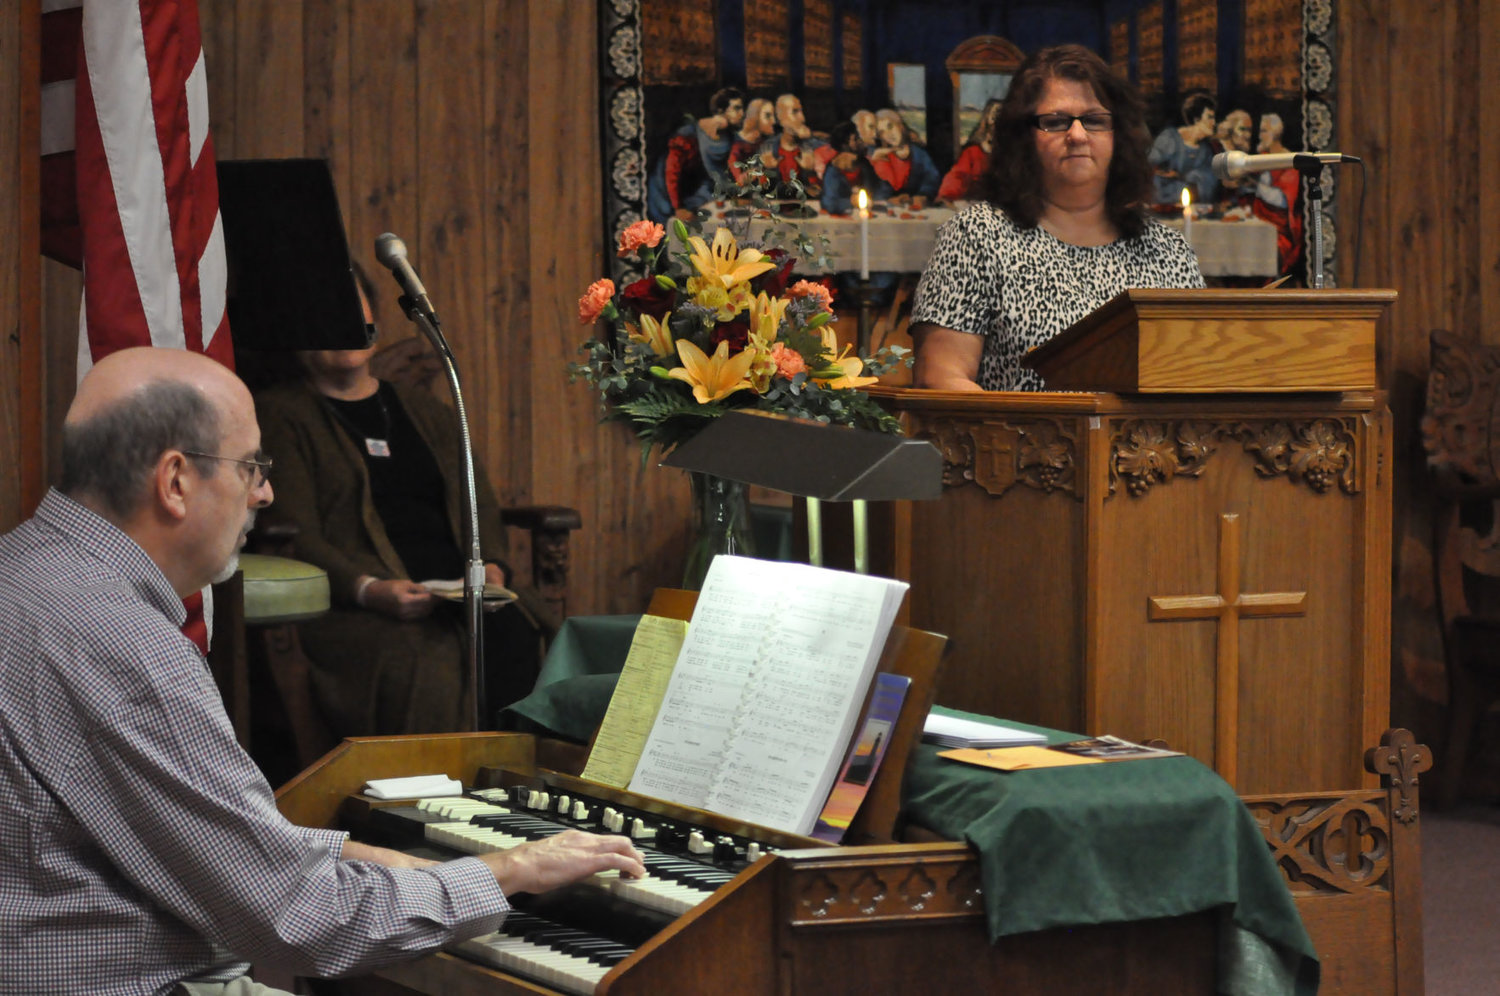 Kathy Addler listens as her husband, Ron, plays the organ Sunday during the final worship service at Milligan Memorial Presbyterian Church. The land for the building was donated in the 1890s by Gen. Lew and Susan Wallace.